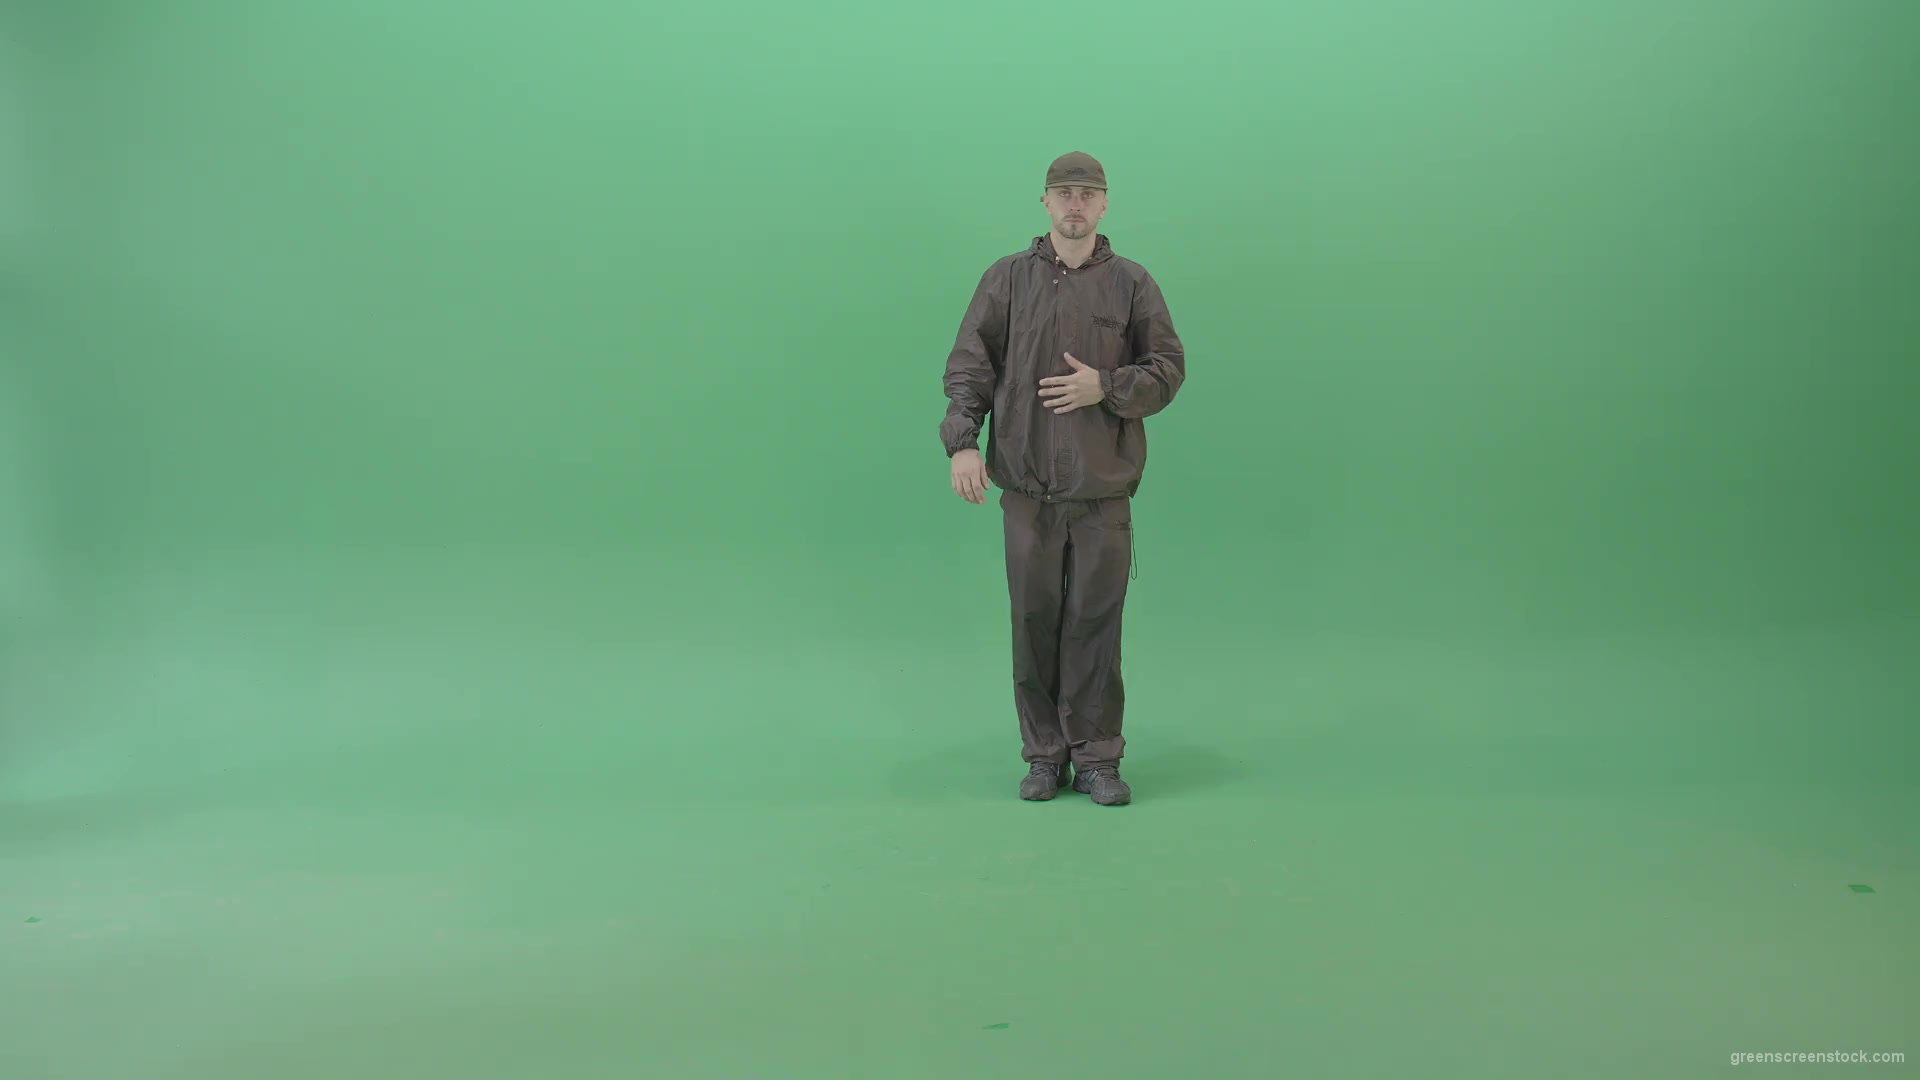 Athlete-Man-making-Air-freeze-on-hand-breaking-on-green-screen-4K-Video-Footage-1920_001 Green Screen Stock